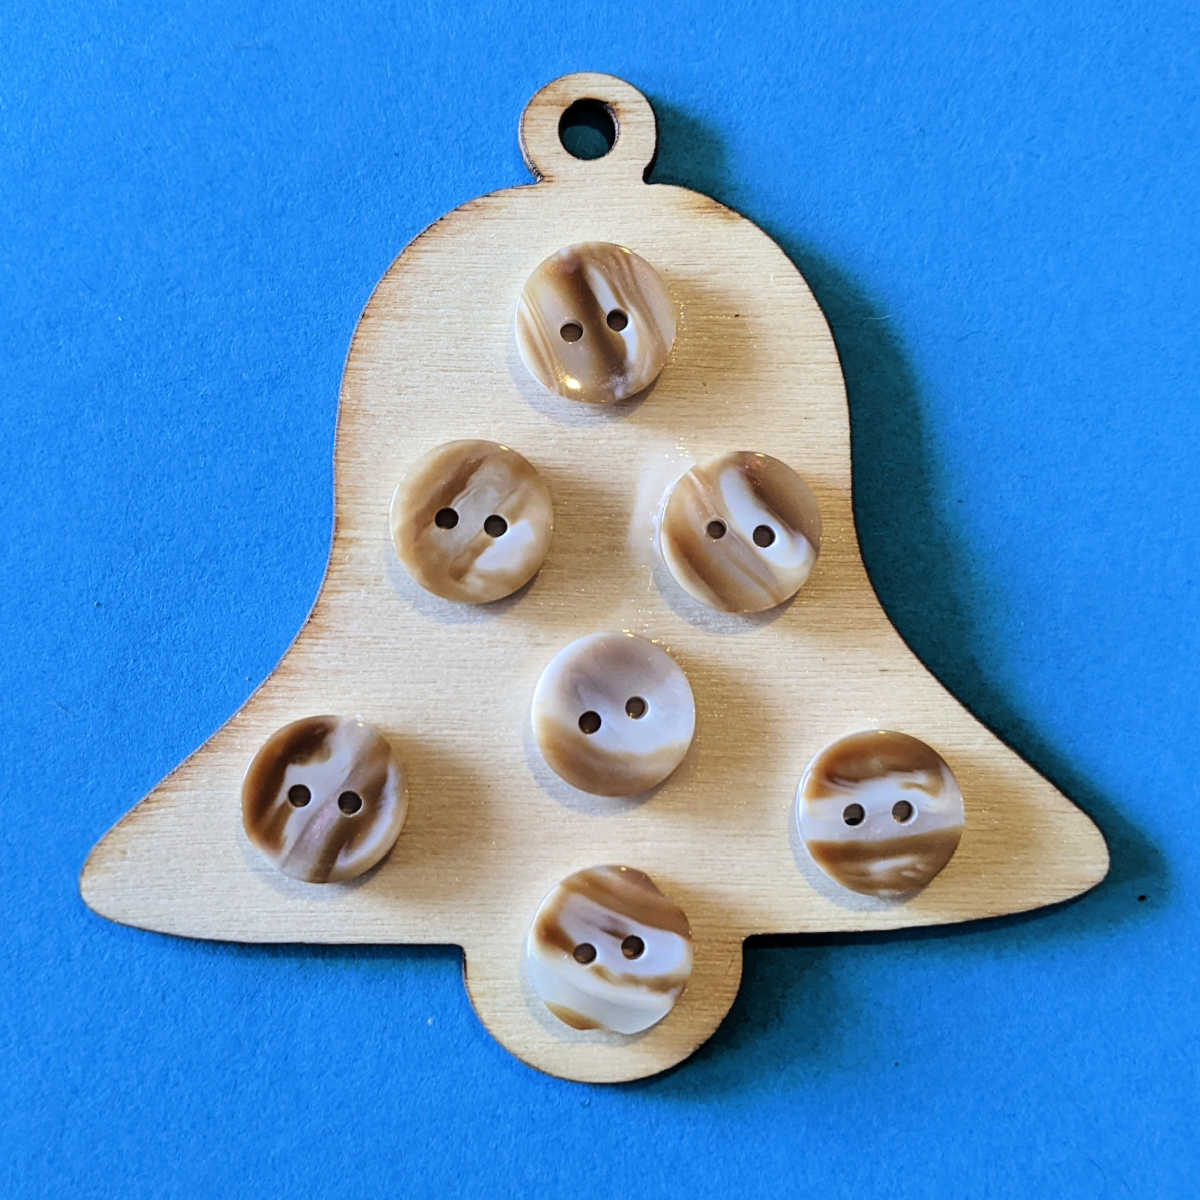 making a wood bell craft with buttons